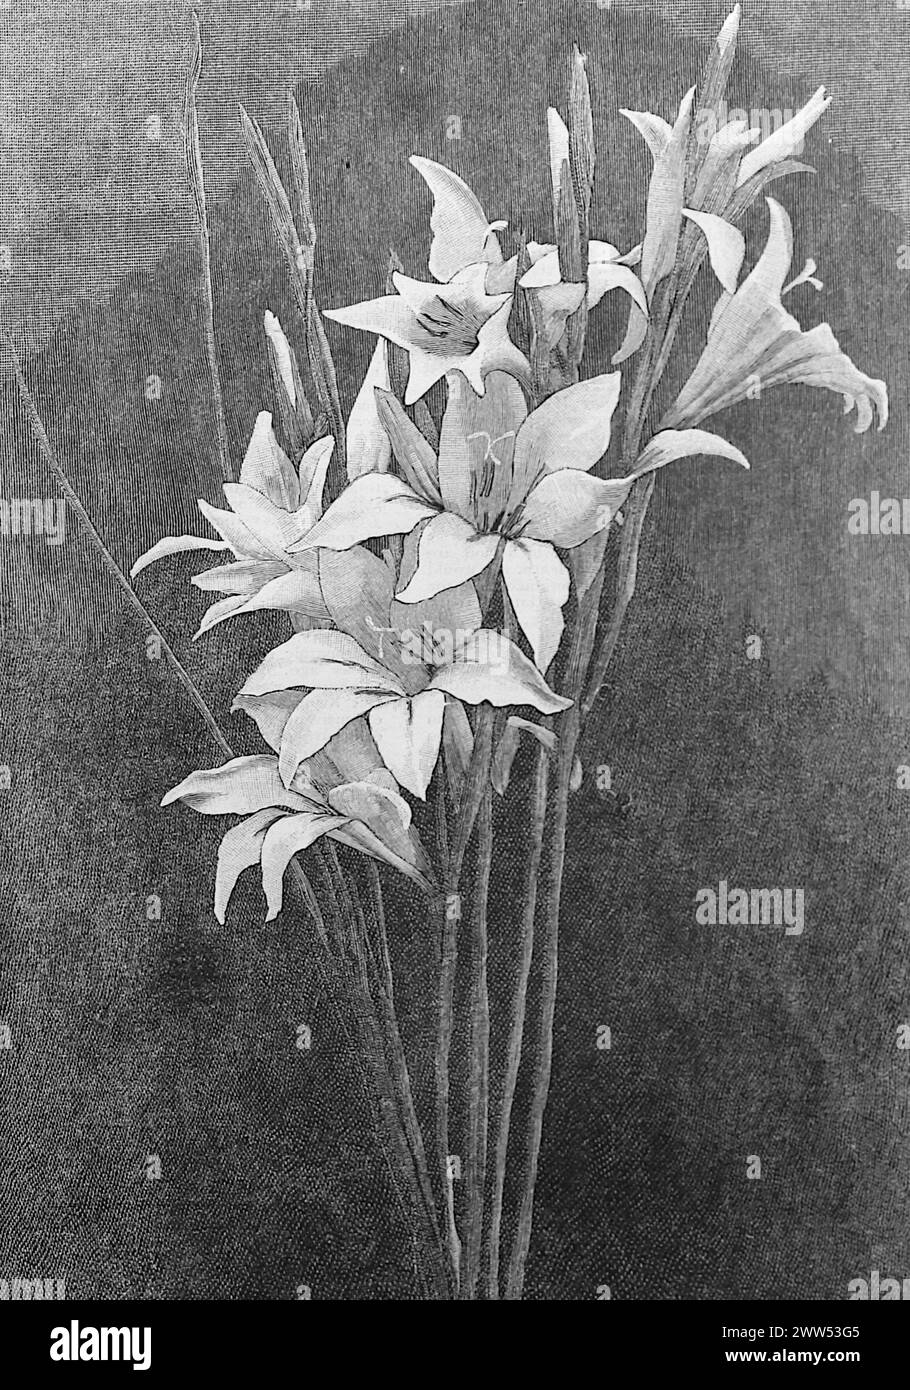 The Bride (Gladiolus Collvillei Alba), from an unattributed still life. Black and white. Photograph taken from a magazine originally published in 1899. Stock Photo